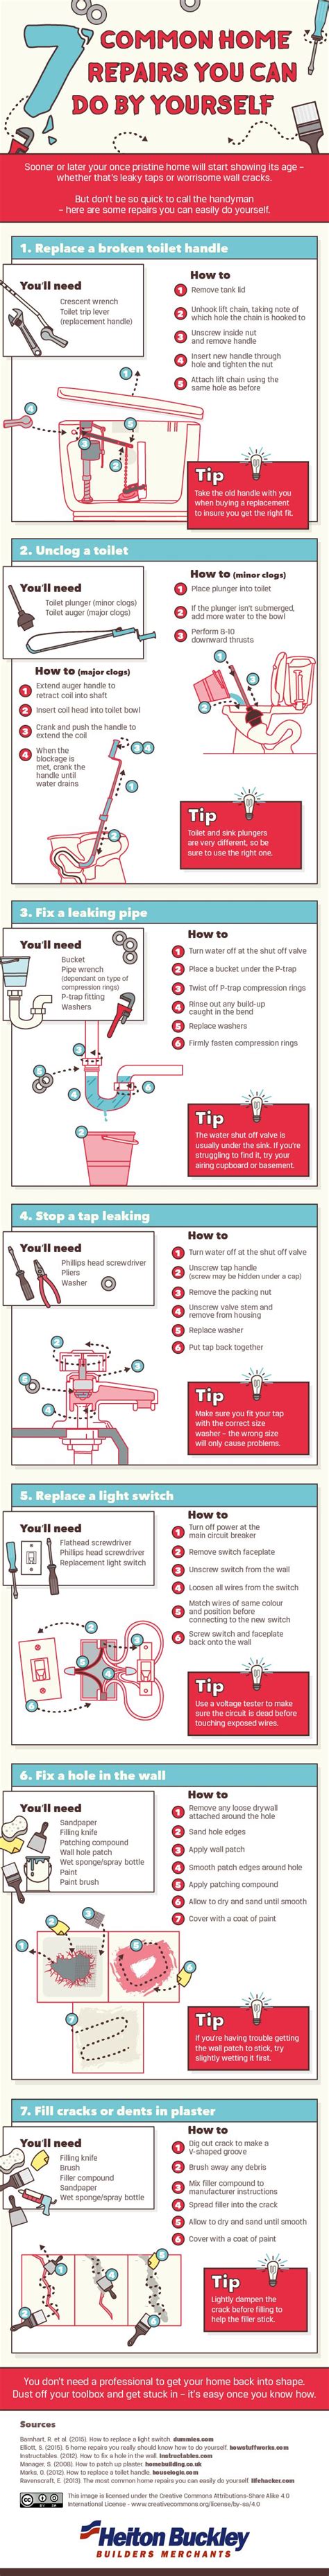 This Is A Fantastic Infographic That Showcases 7 Common Home Repairs